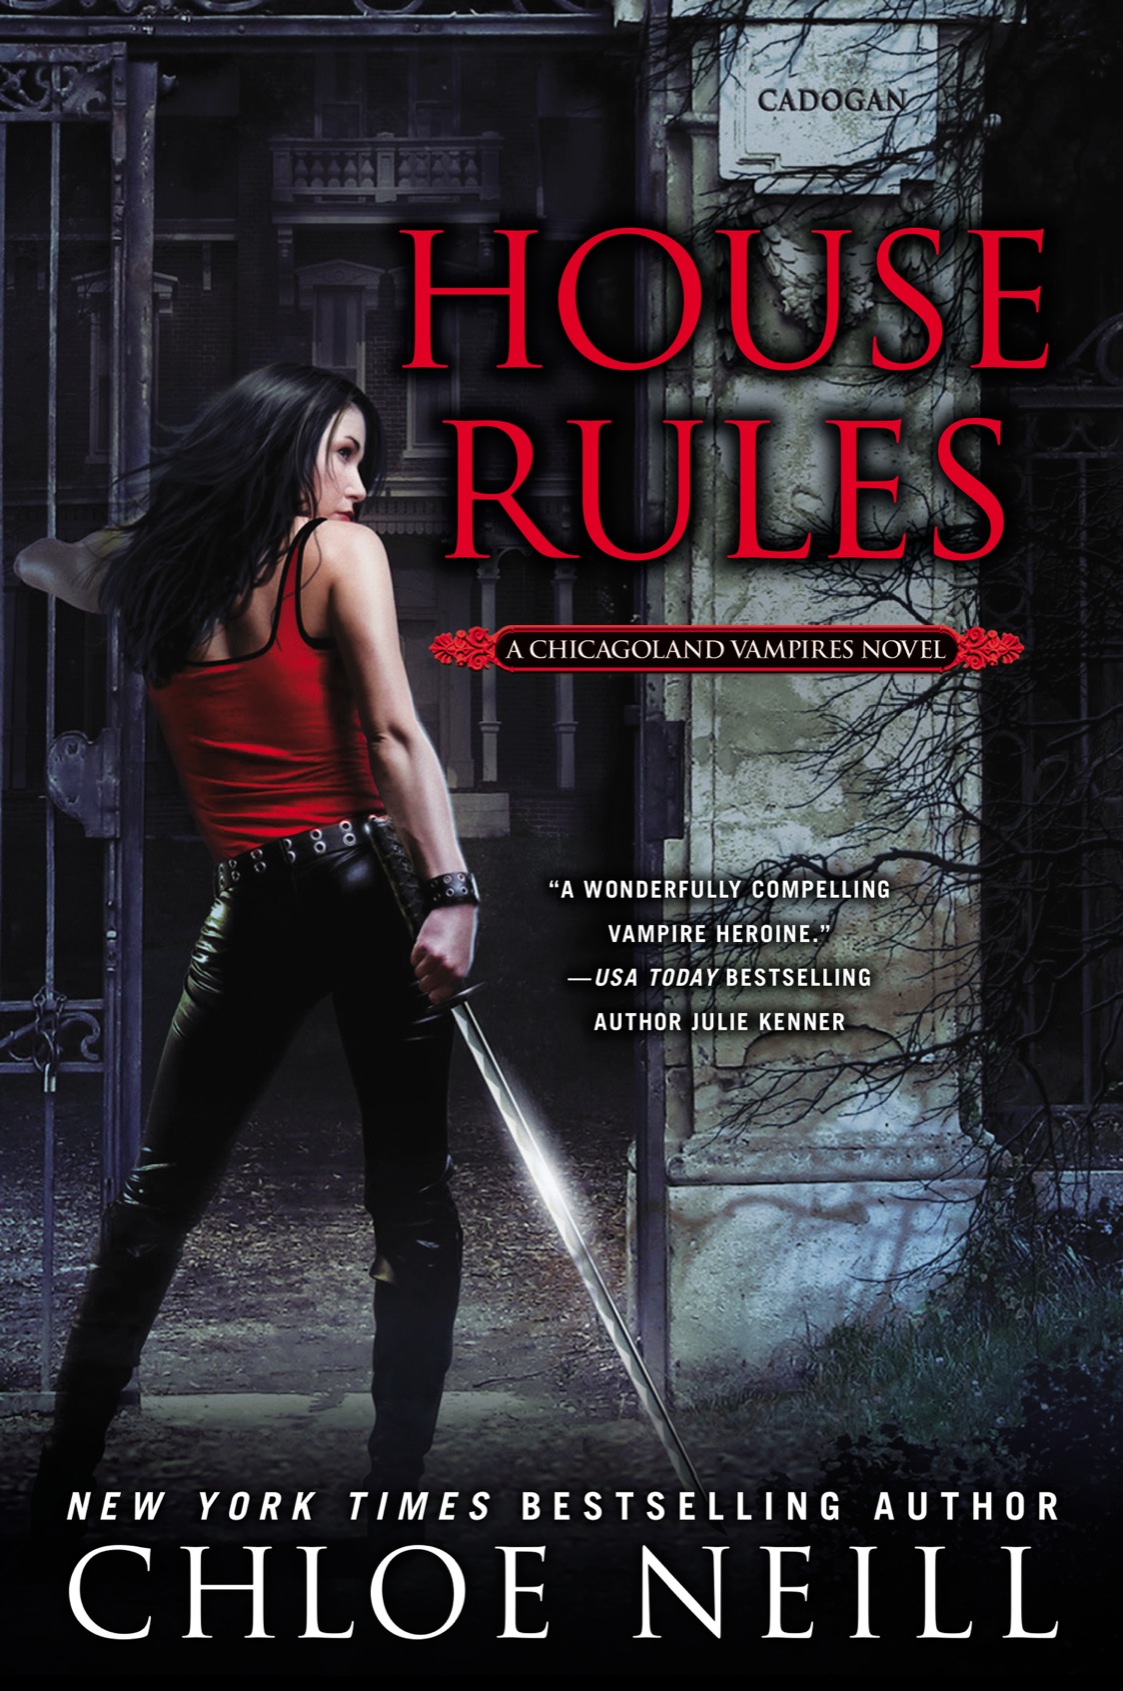 House Rules (2013) by Chloe Neill